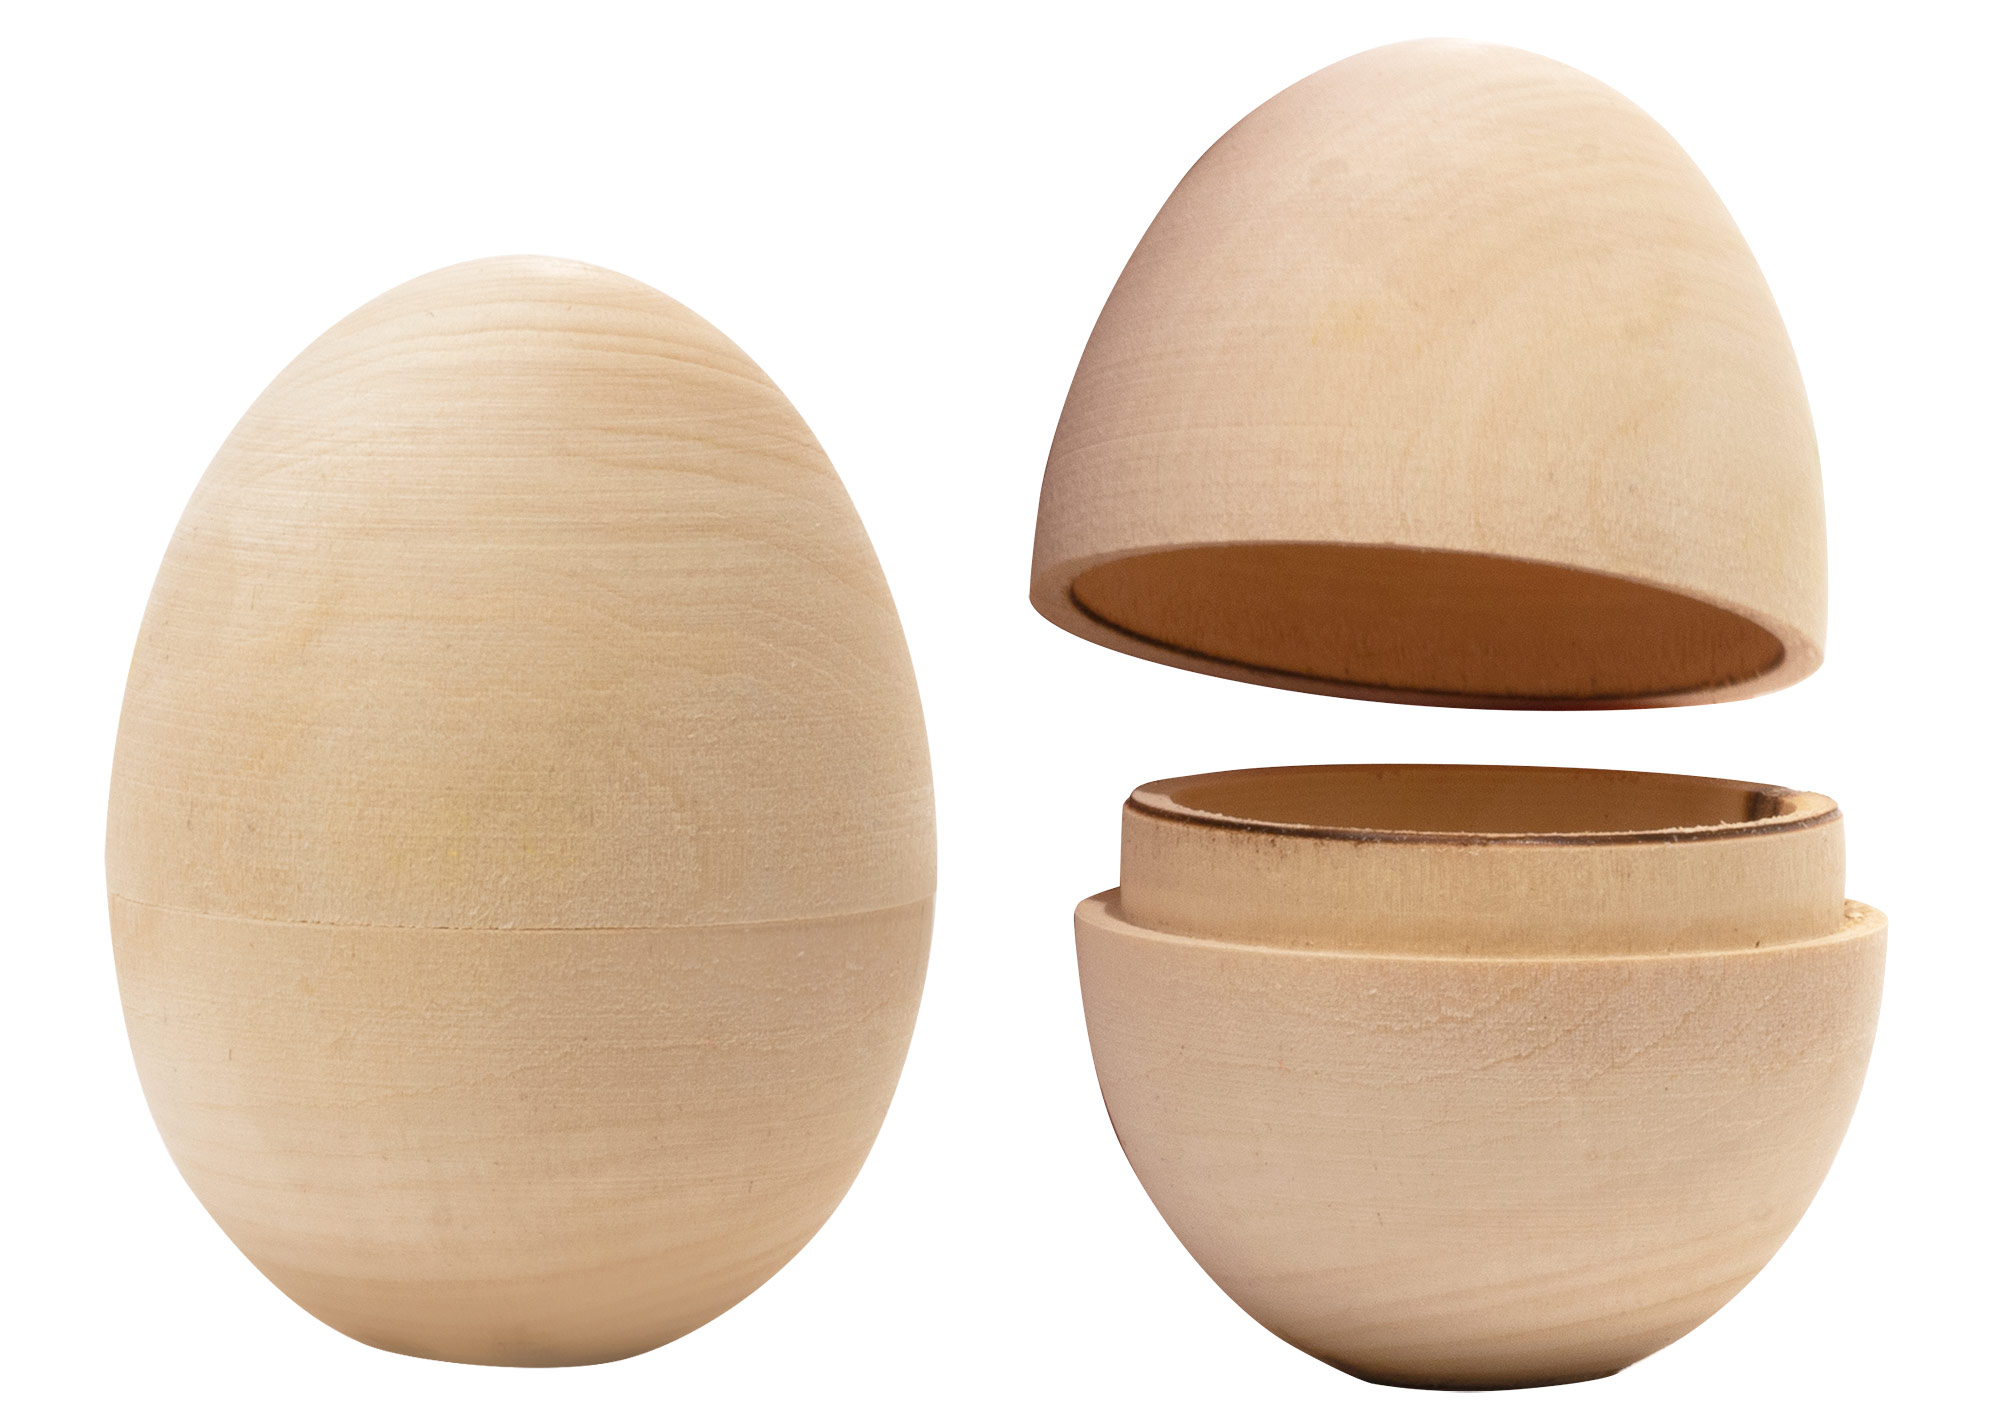 Rolled Wooden Eggs - TinkerLab